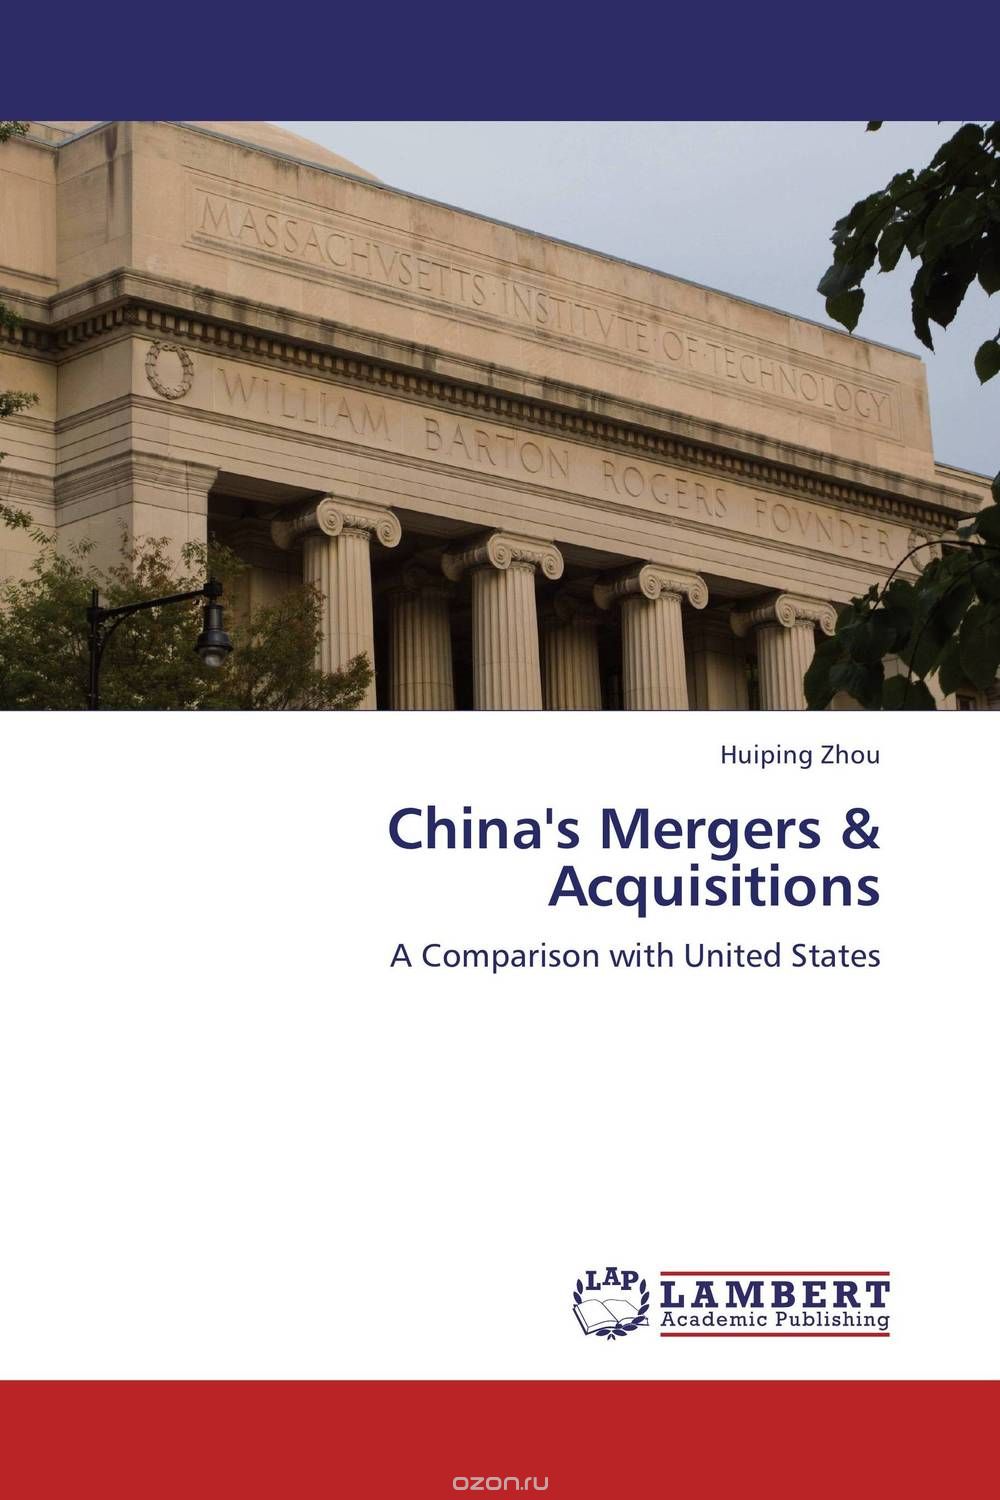 China's Mergers & Acquisitions